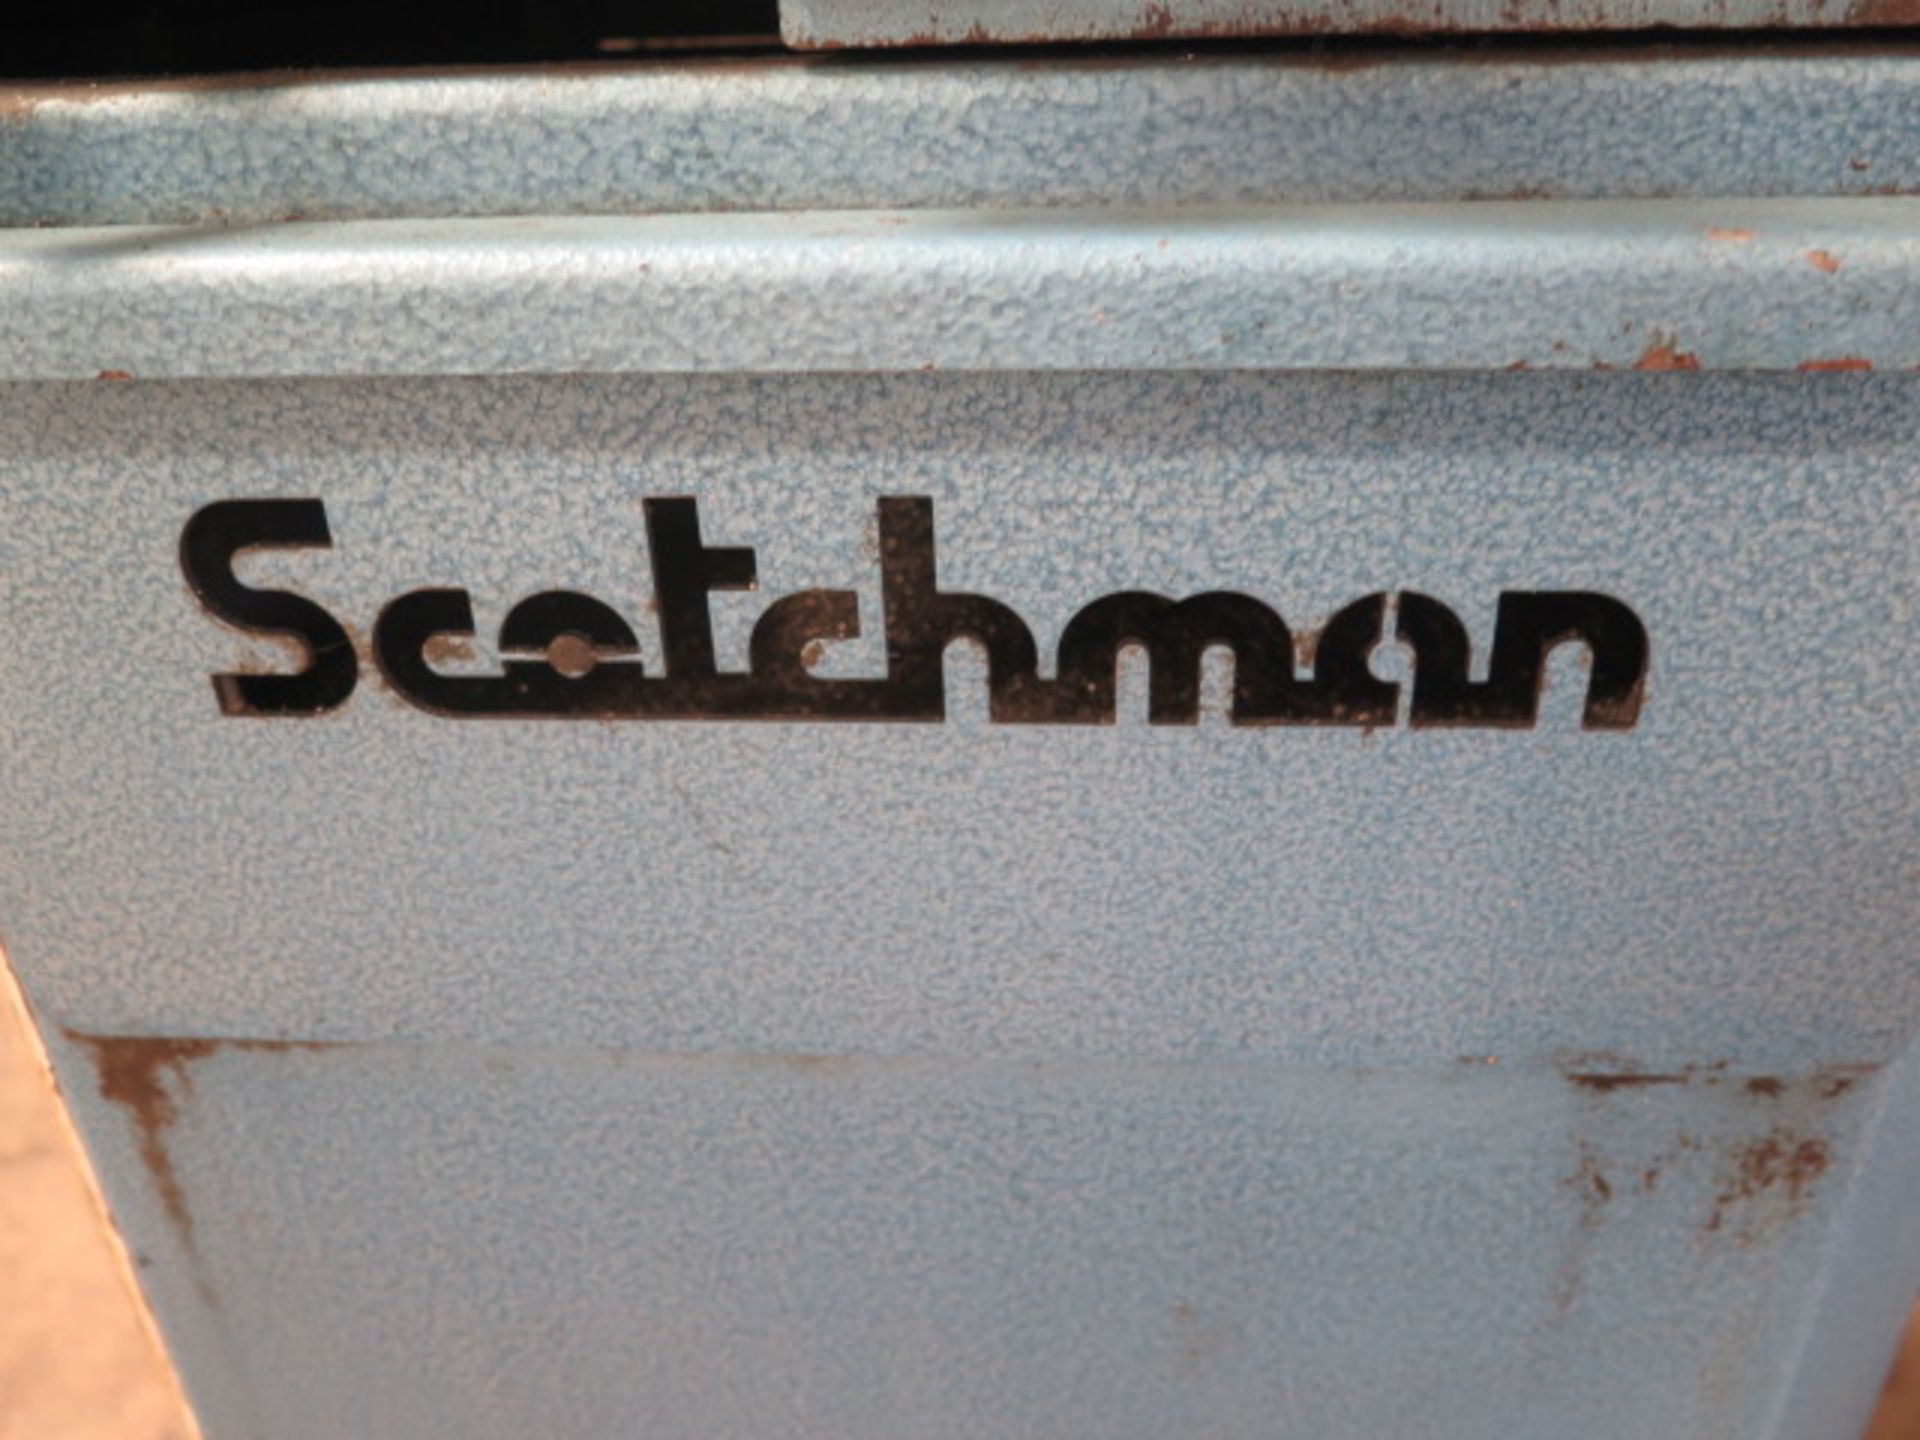 Scotchman CPO-275 Miter Cold Saw w/ Speed Clamping, Coolant (SOLD AS-IS - NO WARRANTY) - Image 3 of 10